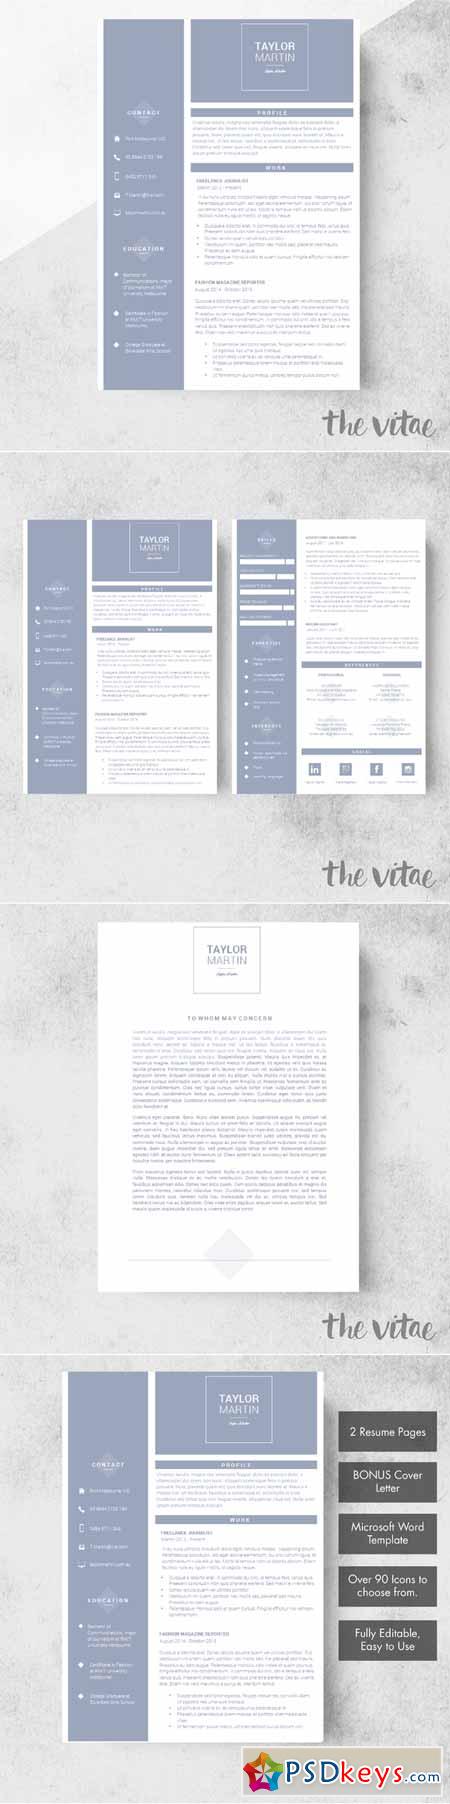 Sailor Resume Template +Cover Letter 604414